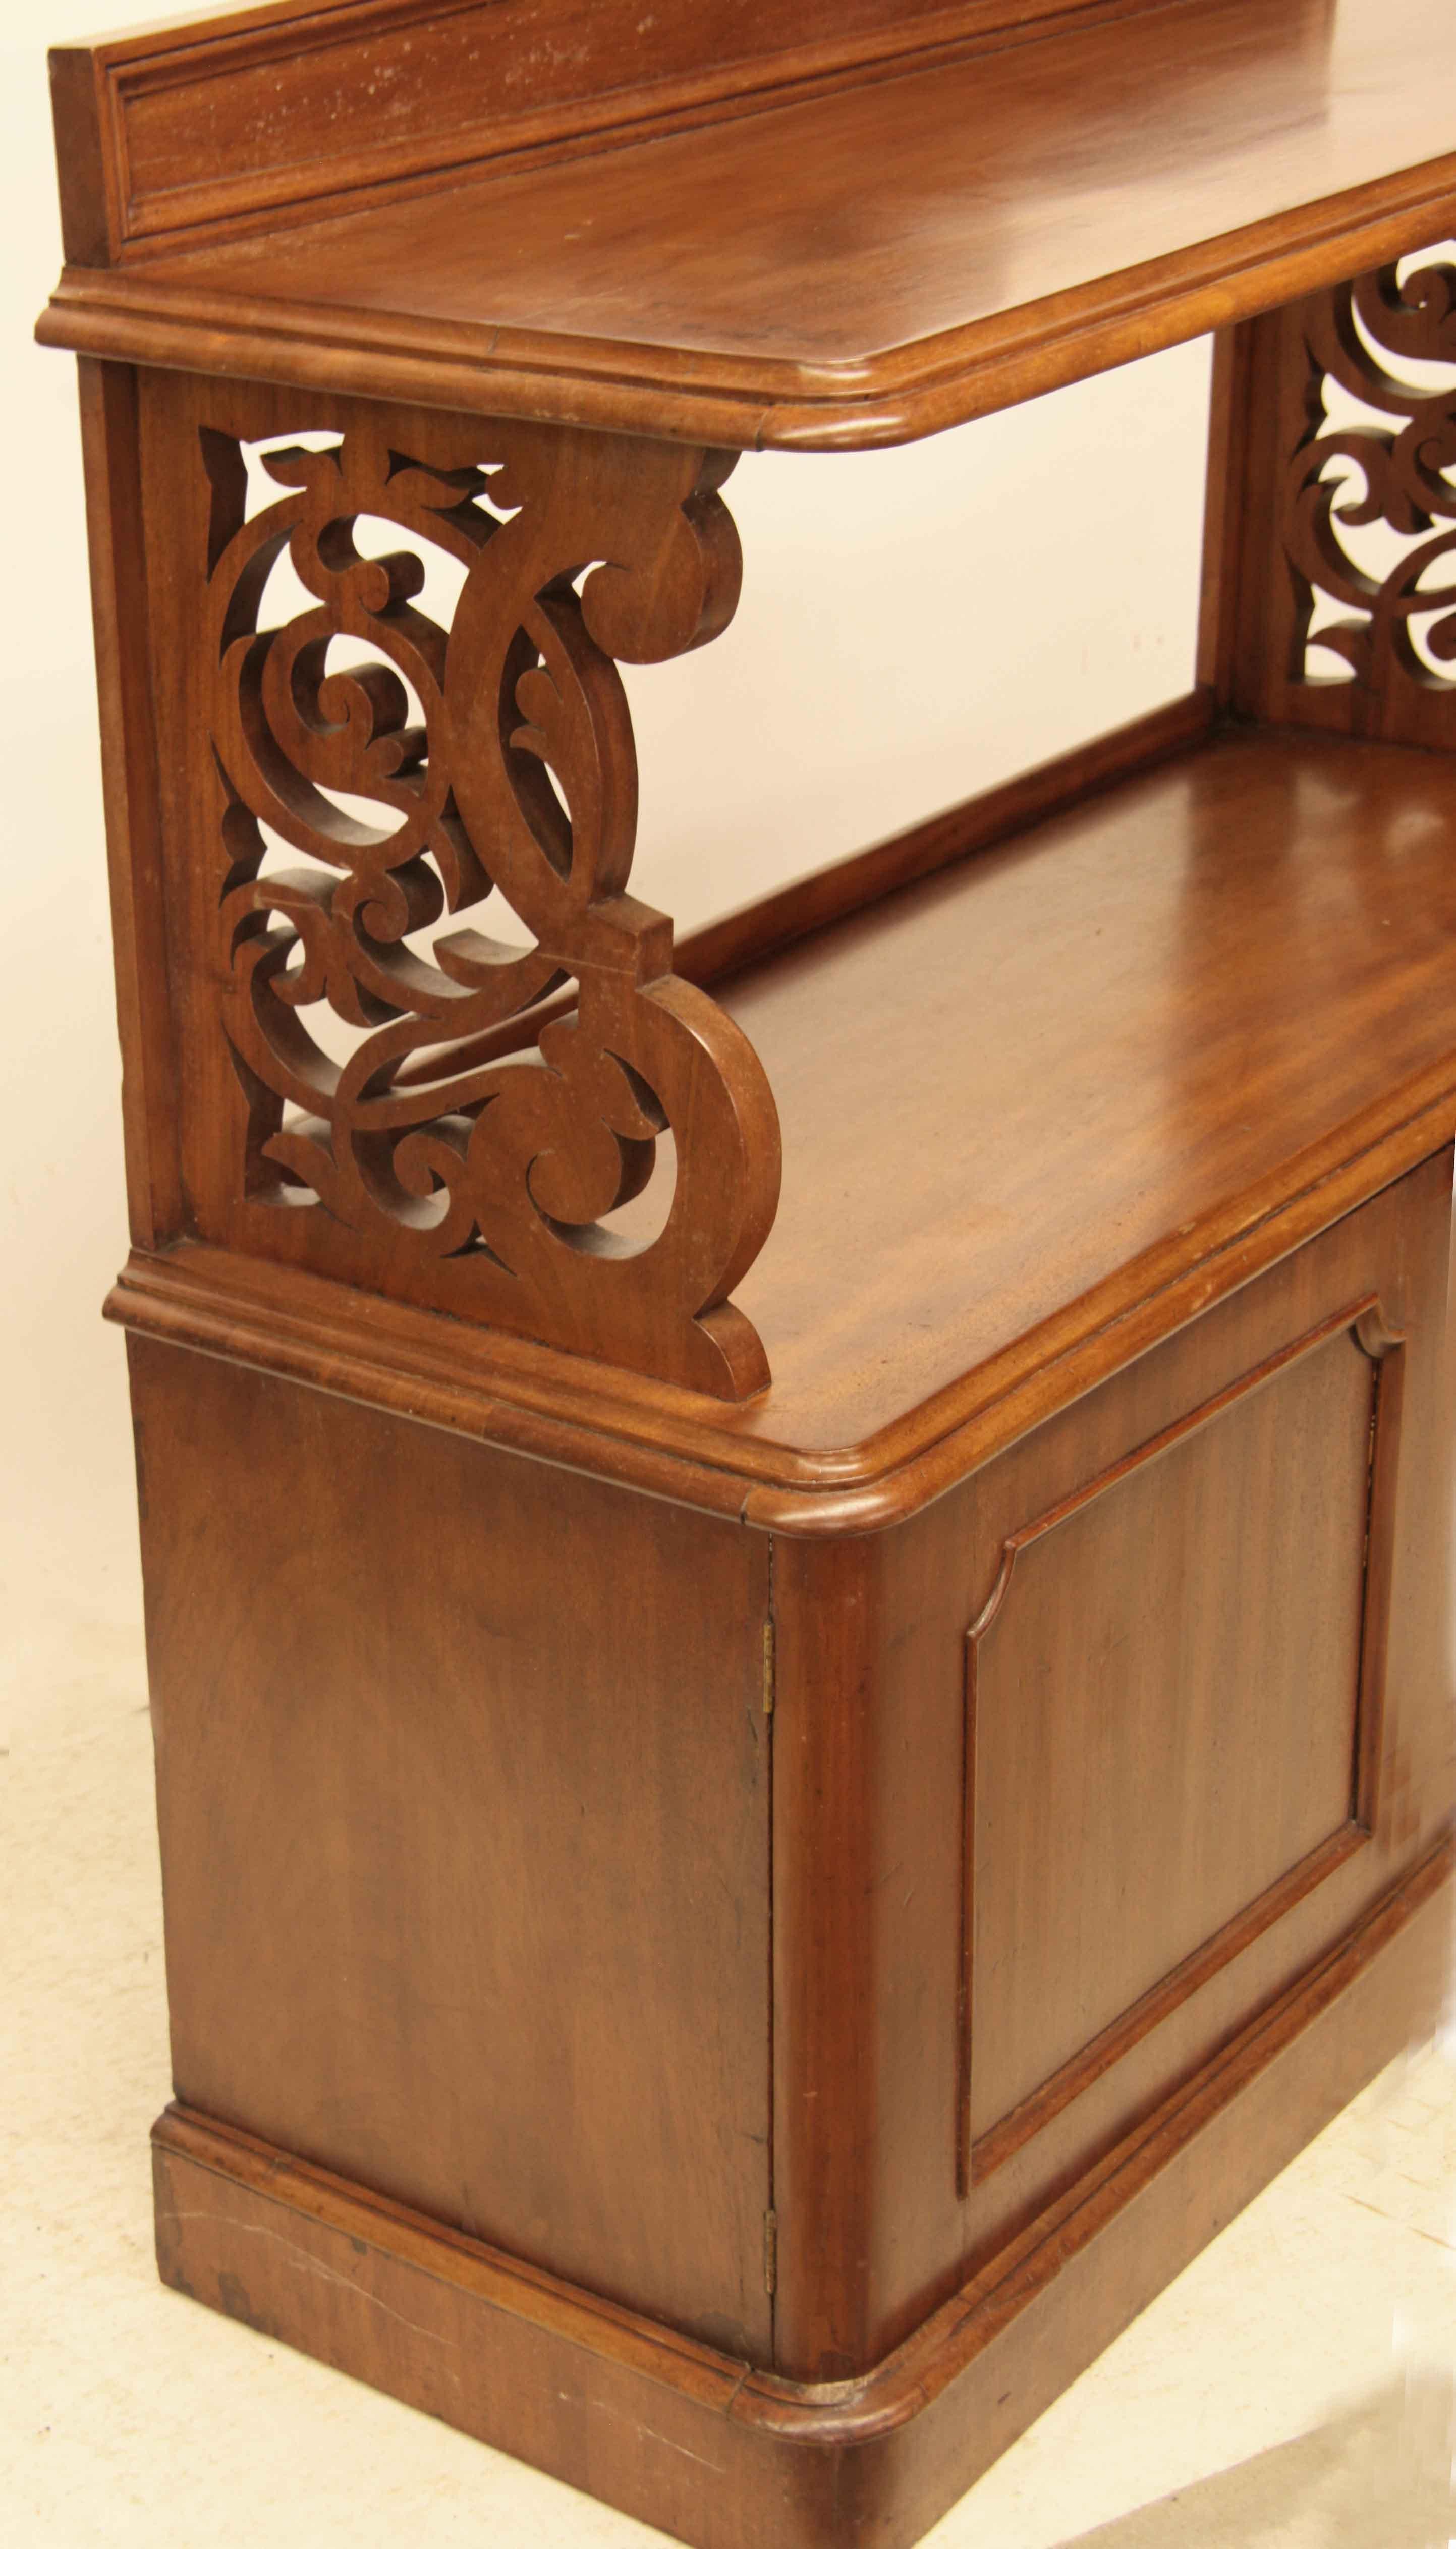 William IV two tier buffet, with gallery back surrounded by cove molding; top and lower shelf with beautiful faded mahogany color , molded edges.  The outstanding features are the two reticulated side supports with a multitude of curves and curls.  